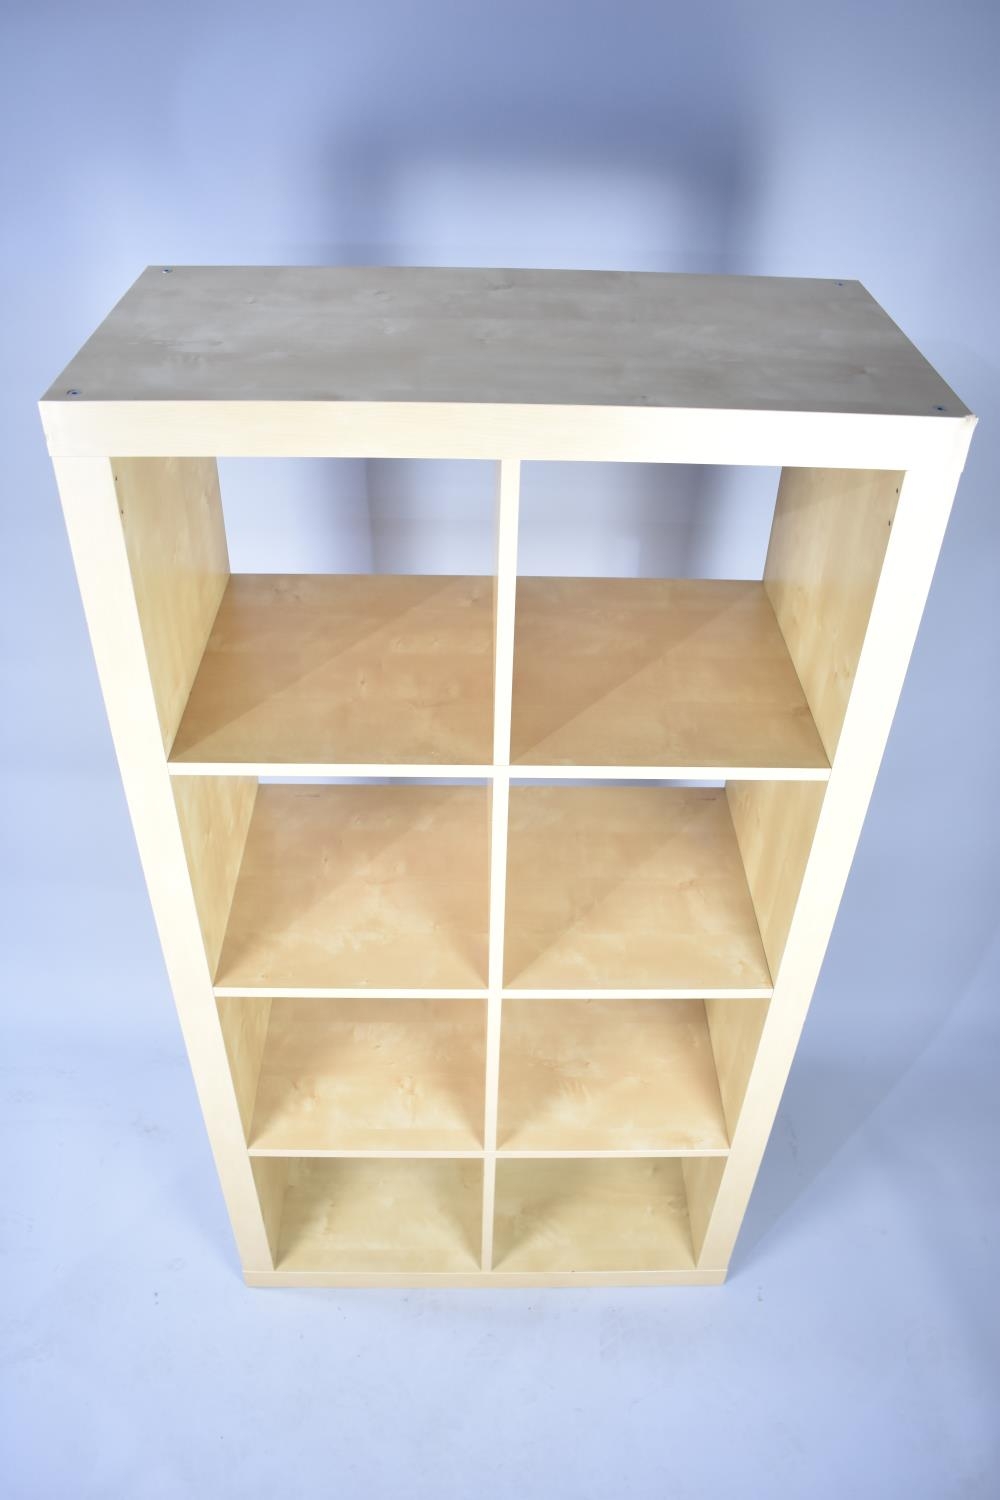 A Modern Eight Section Storage Unit, 79cms Wide and 120cms High - Image 2 of 2